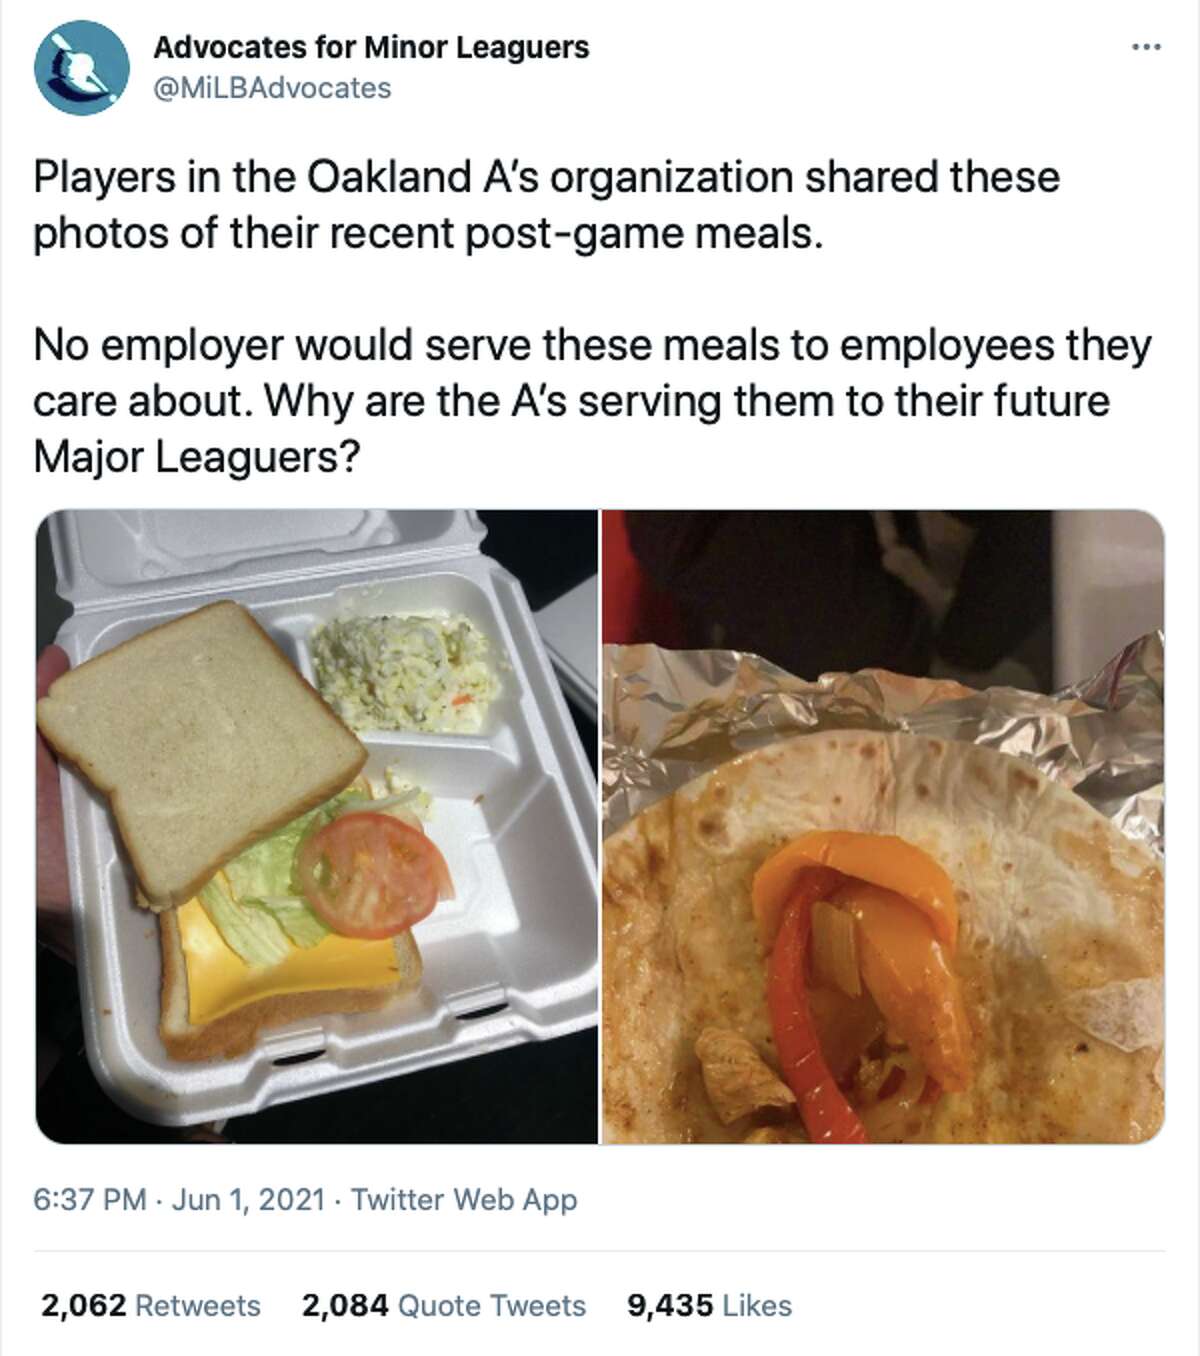 The tweet sent out by Advocates for Minor Leaguers Tuesday showing two meals given to Oakland Athletics minor league players. 